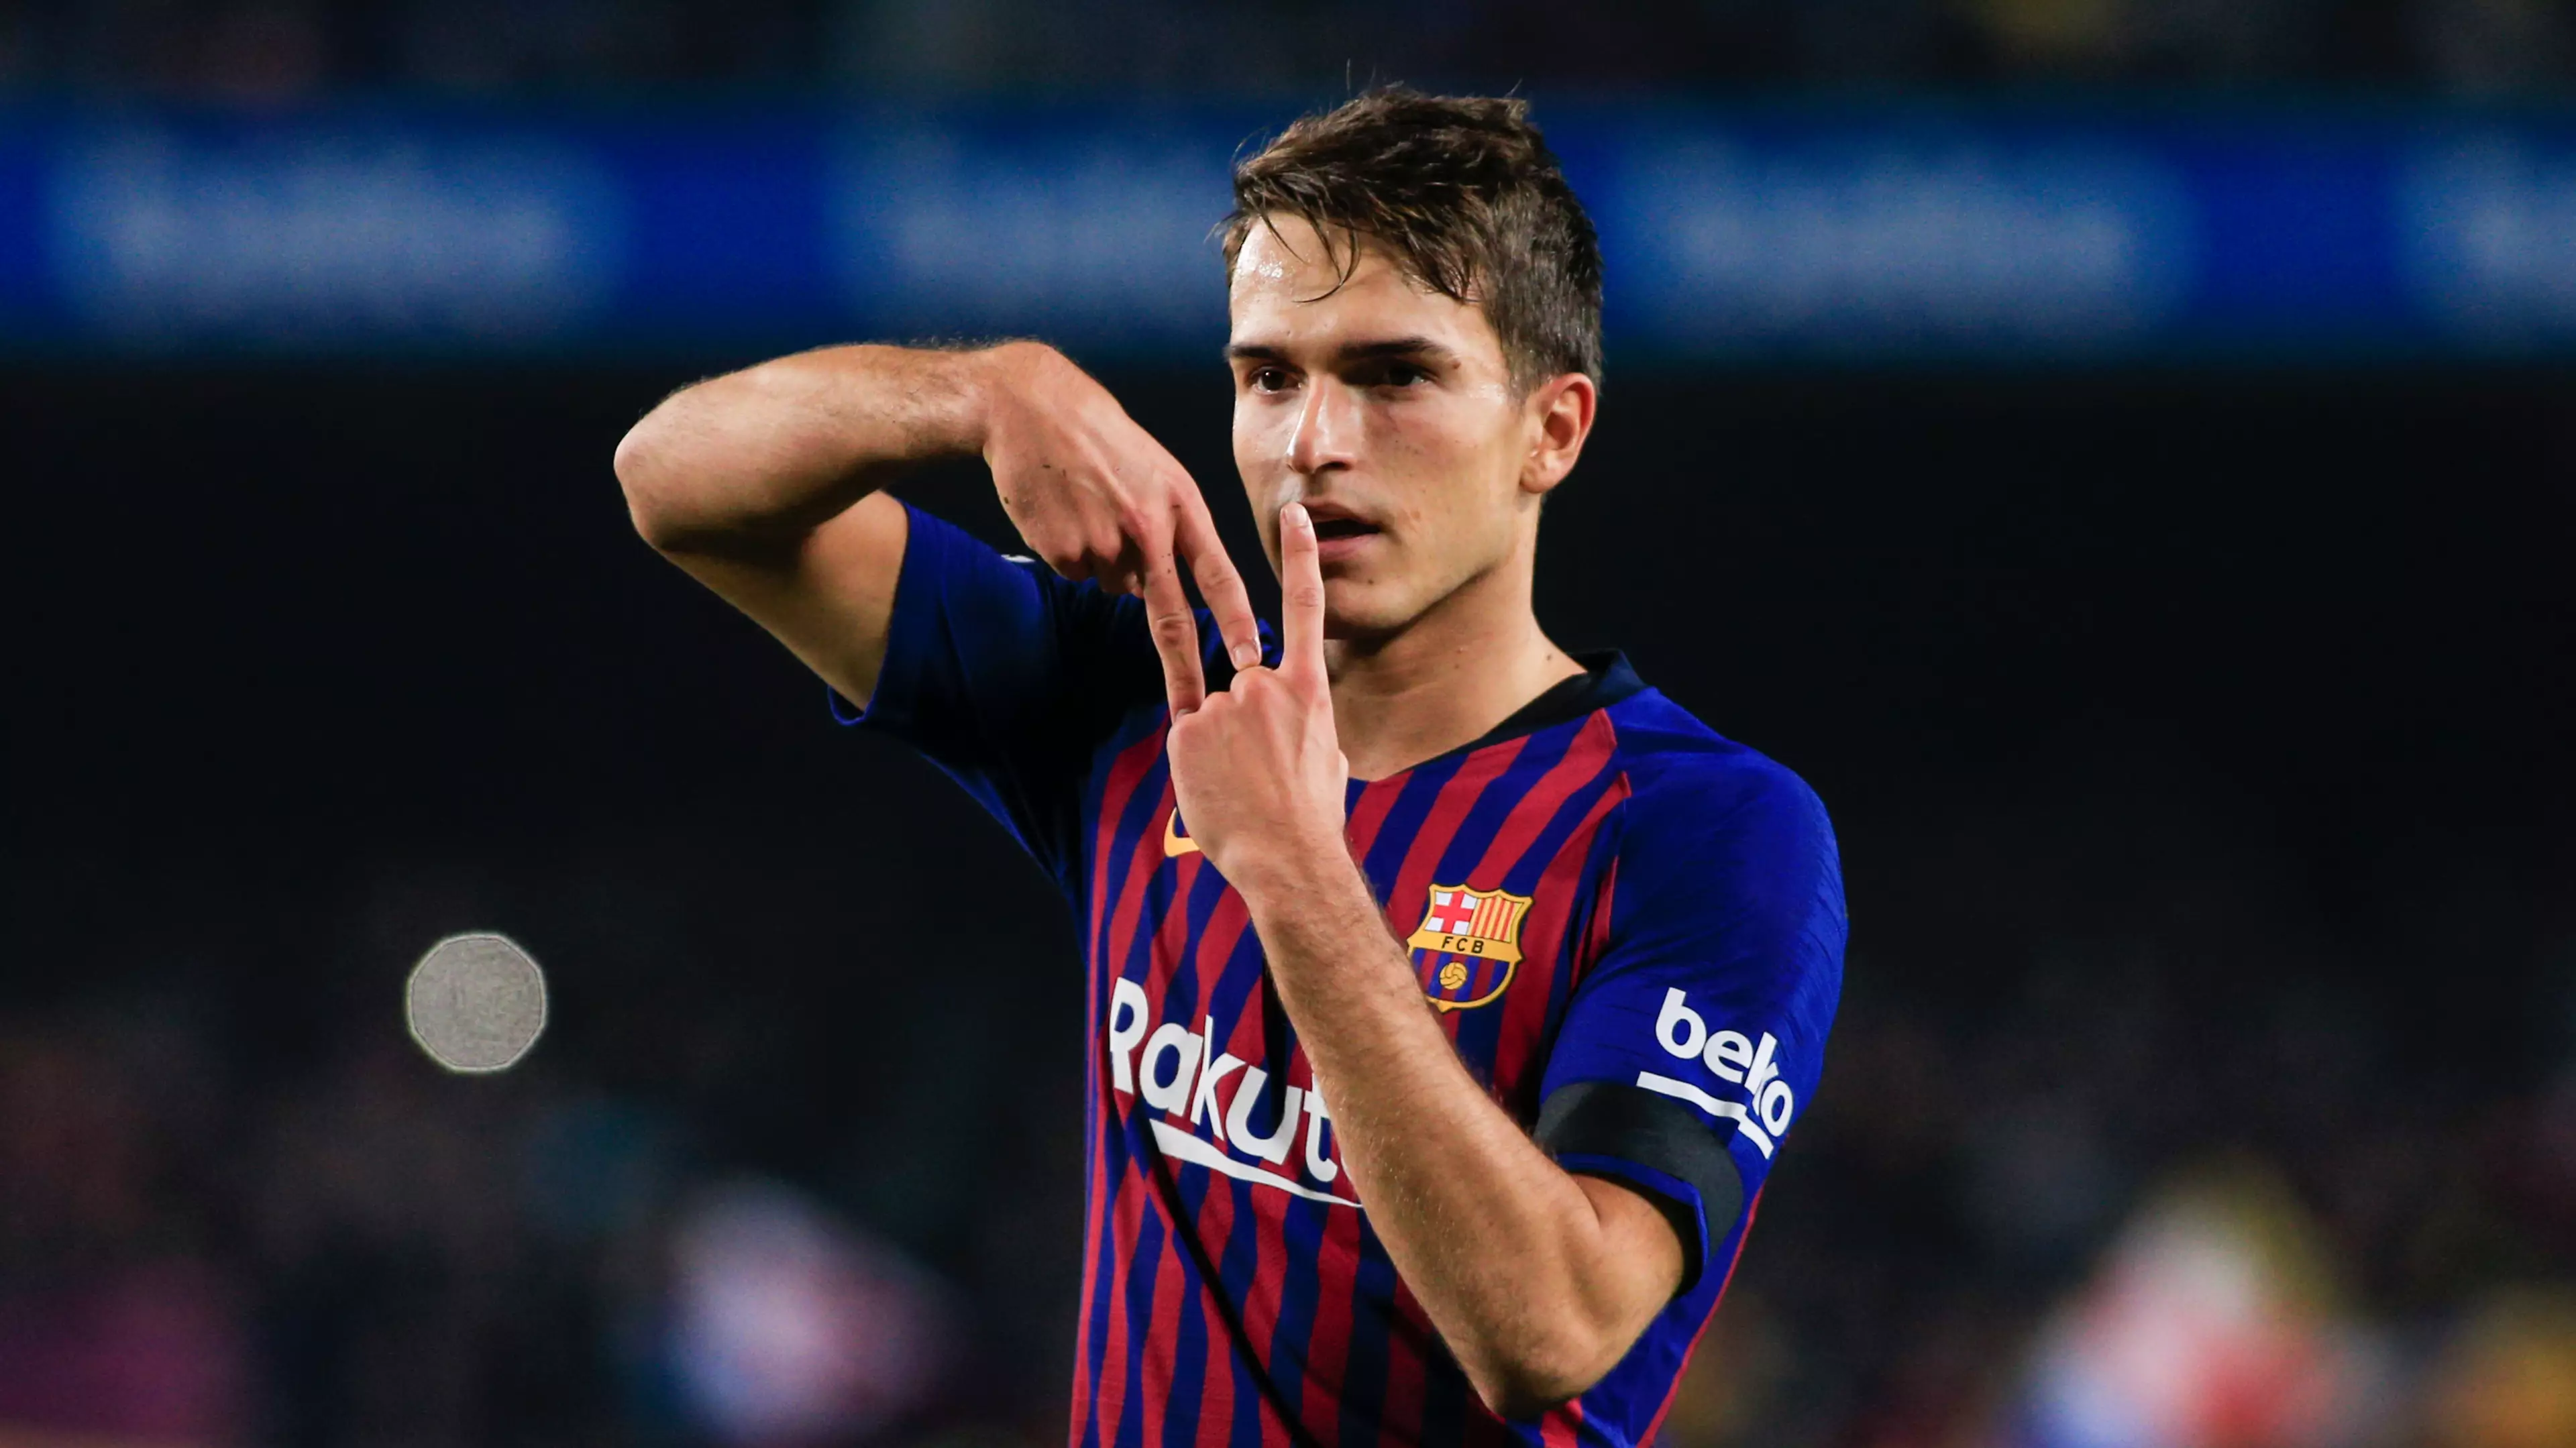 Arsenal Complete Loan Signing Of Denis Suarez Until End Of The Season